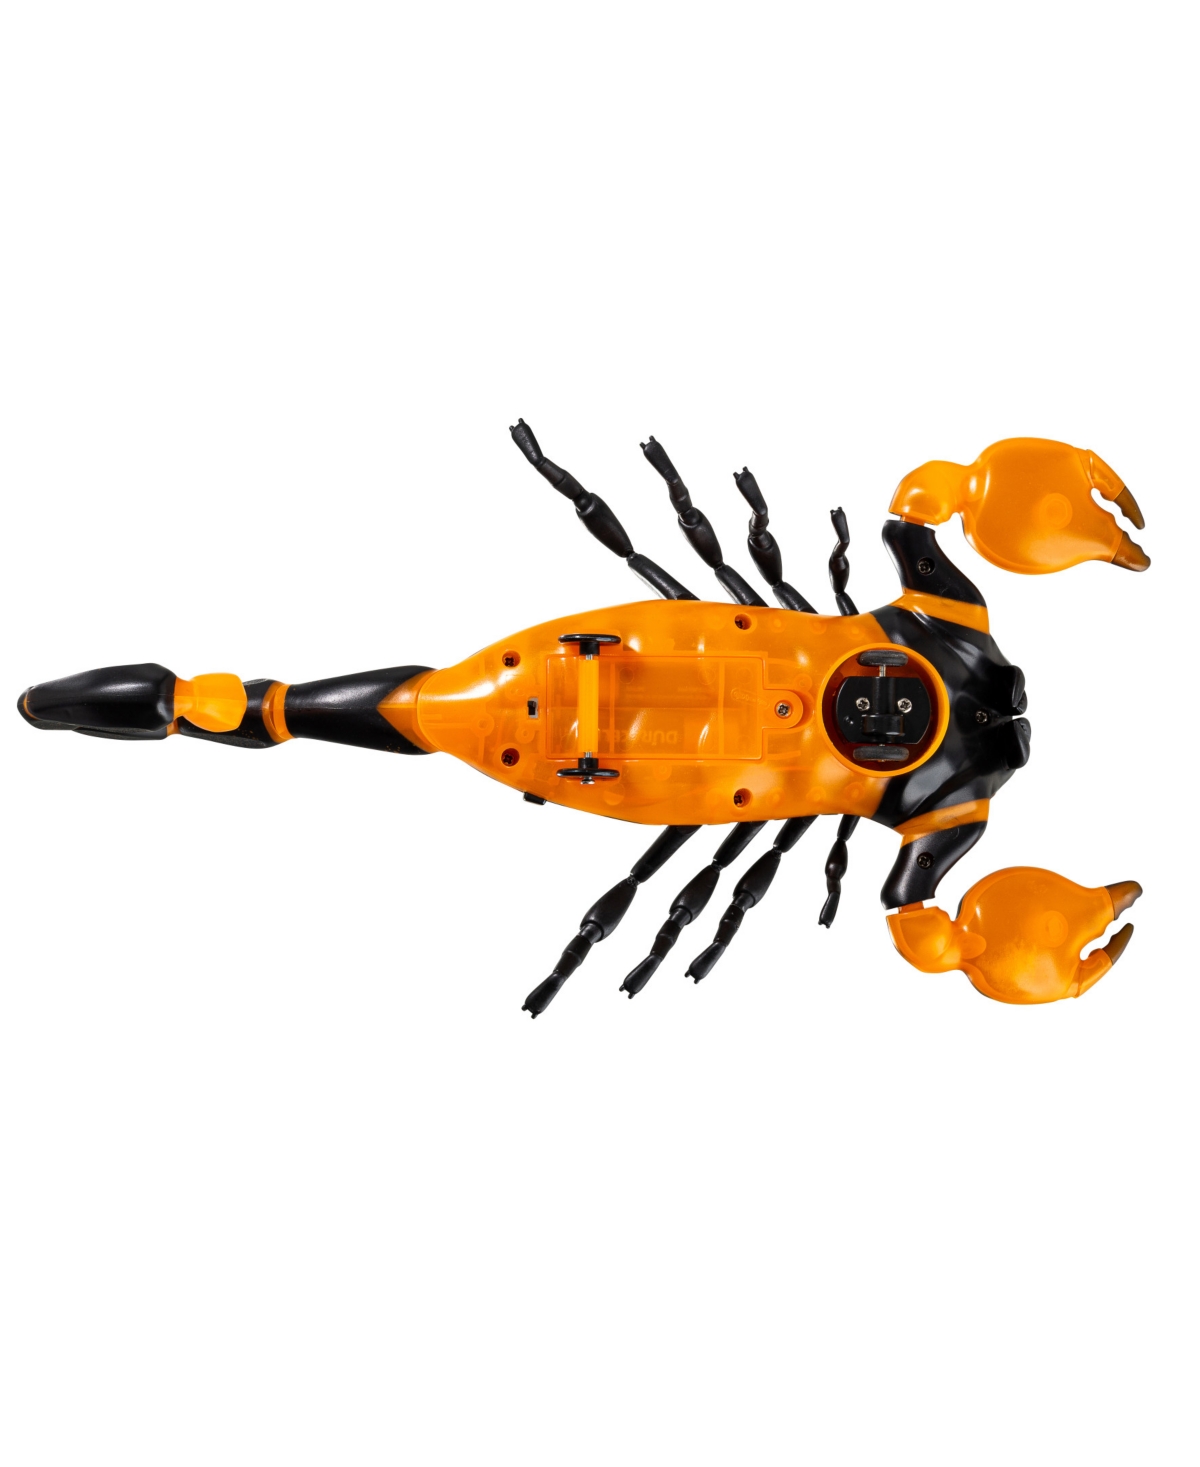 Shop Discovery Rc Scorpion, Glow In The Dark Body, Wireless Remote-control Toy For Kids In Black